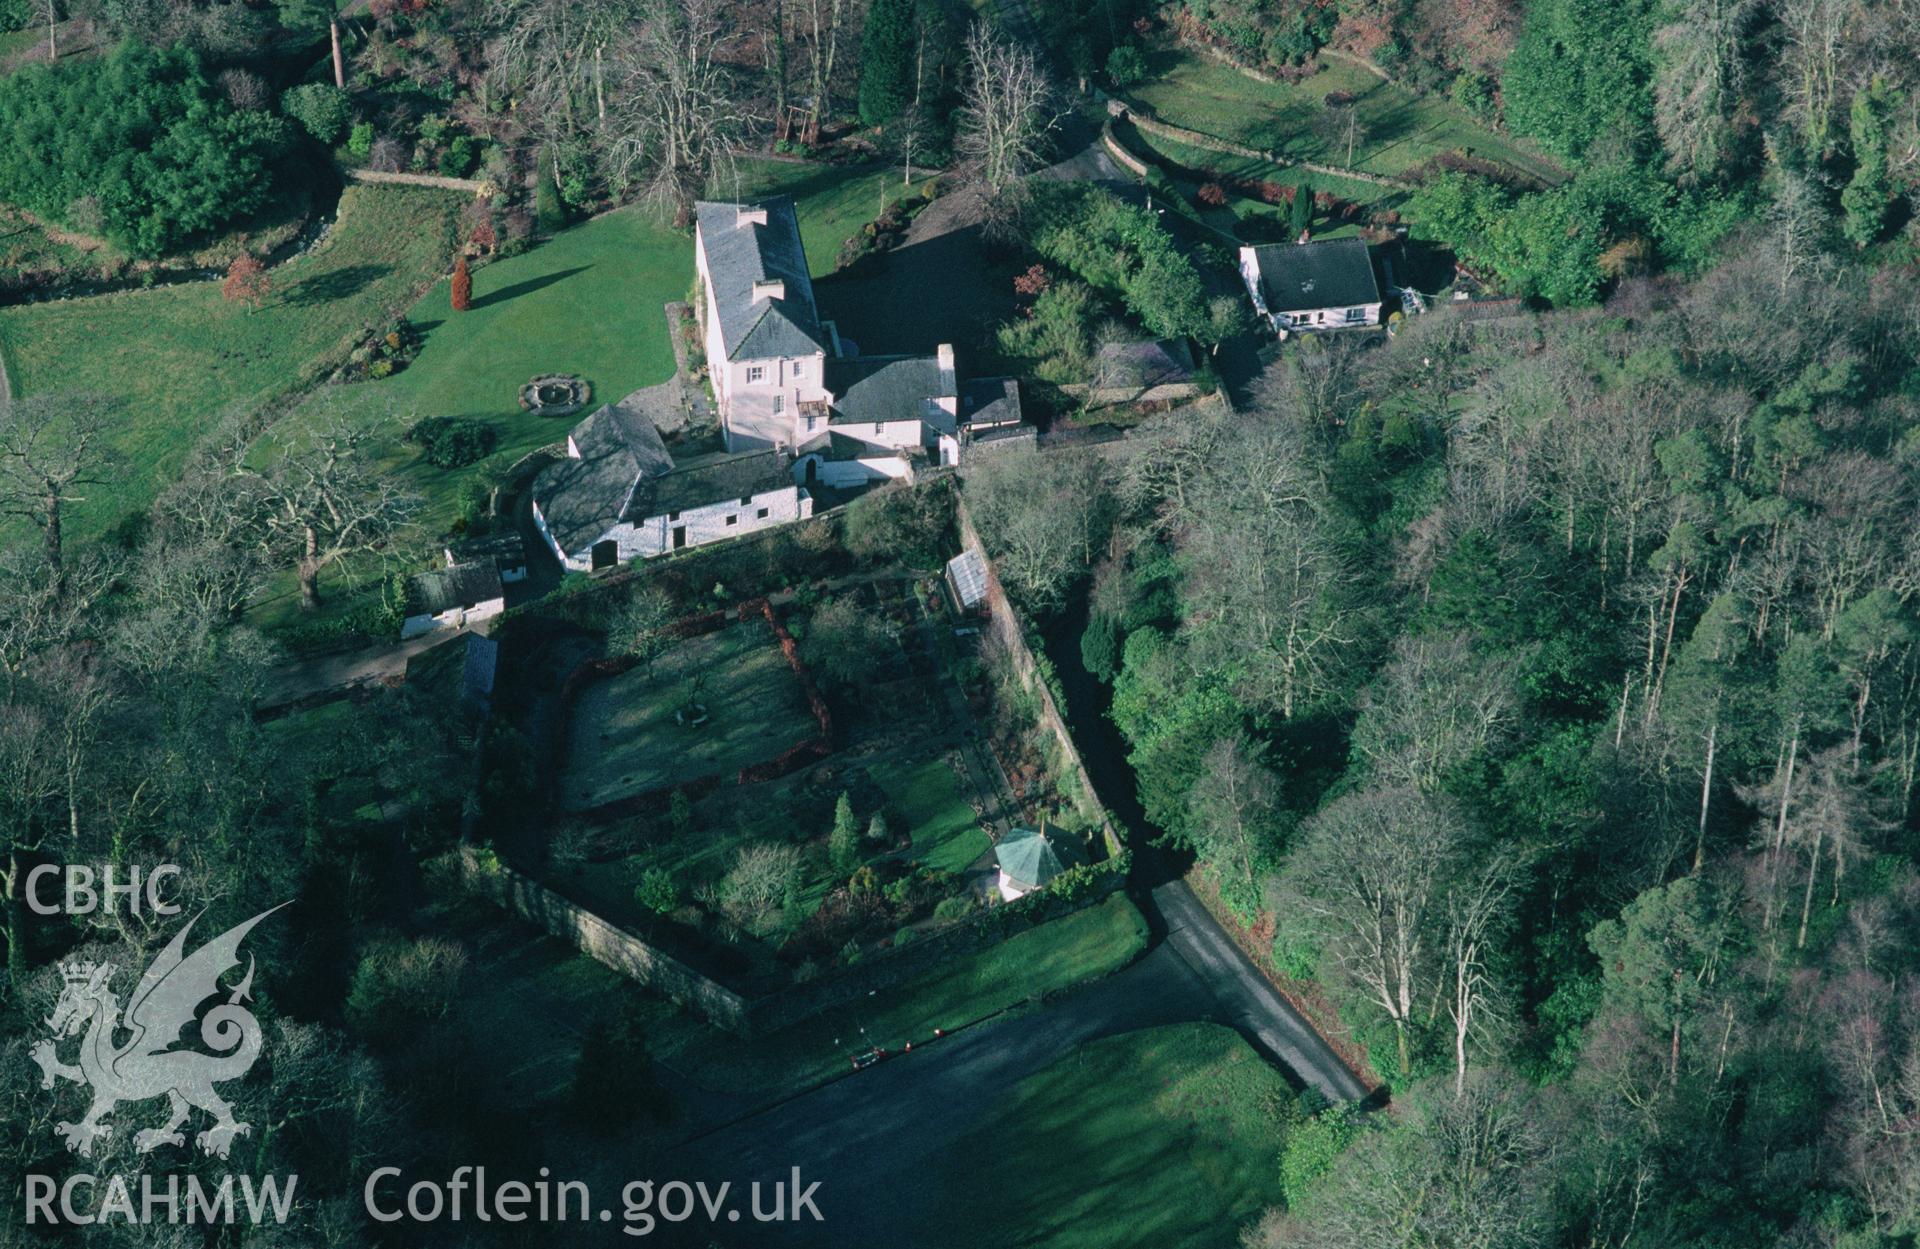 Slide of RCAHMW colour oblique aerial photograph of Colby Lodge, taken by C.R. Musson, 15/2/1997.